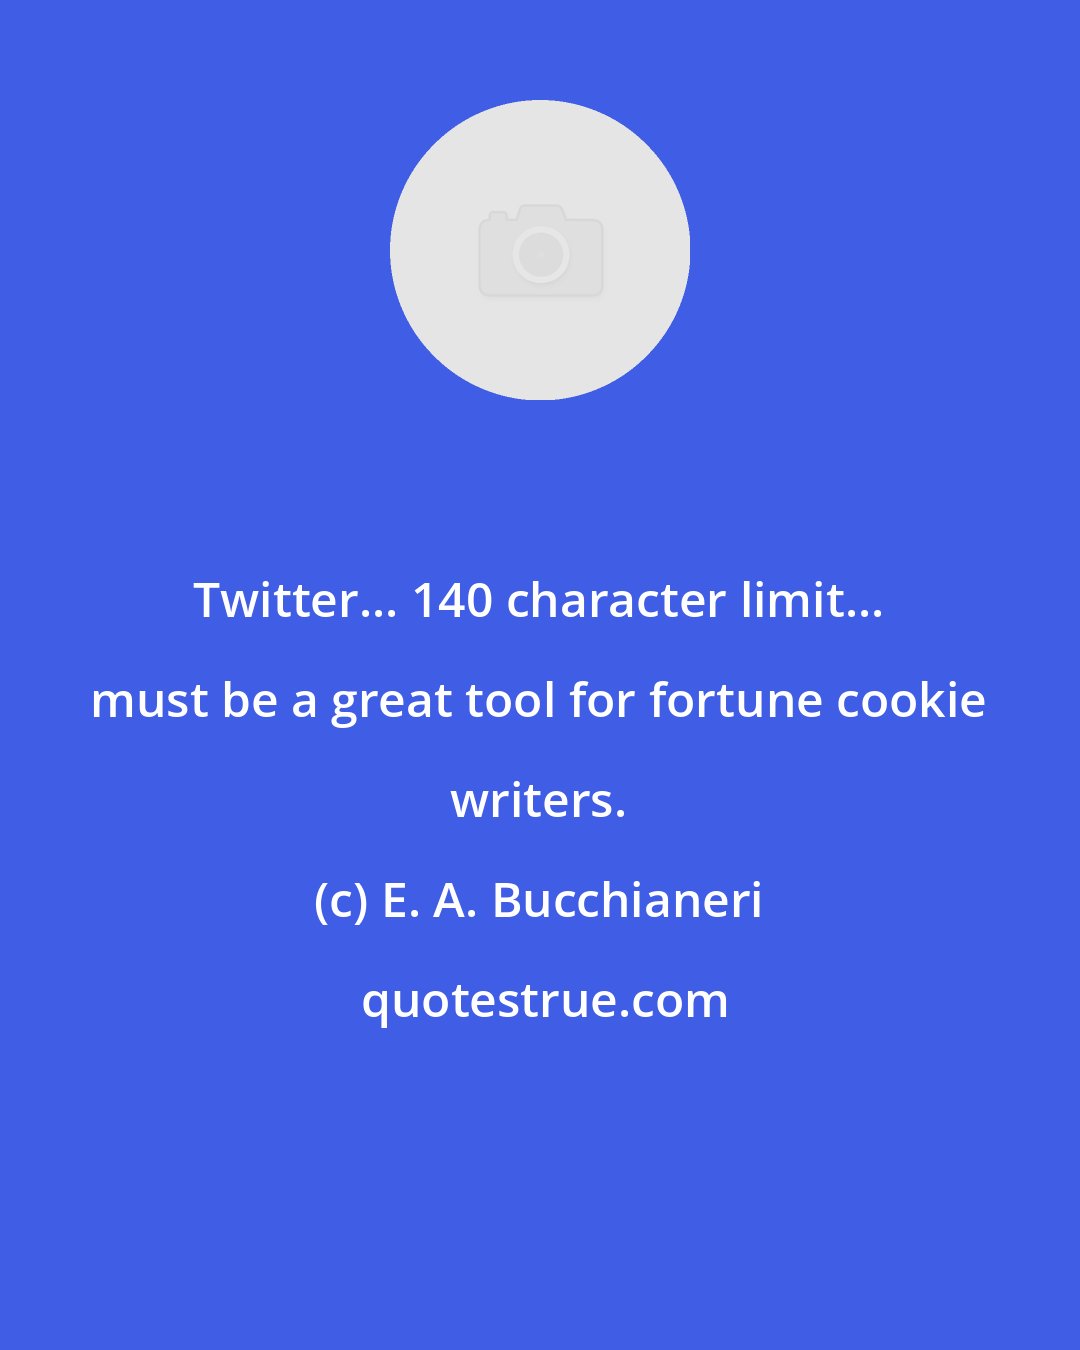 E. A. Bucchianeri: Twitter... 140 character limit... must be a great tool for fortune cookie writers.